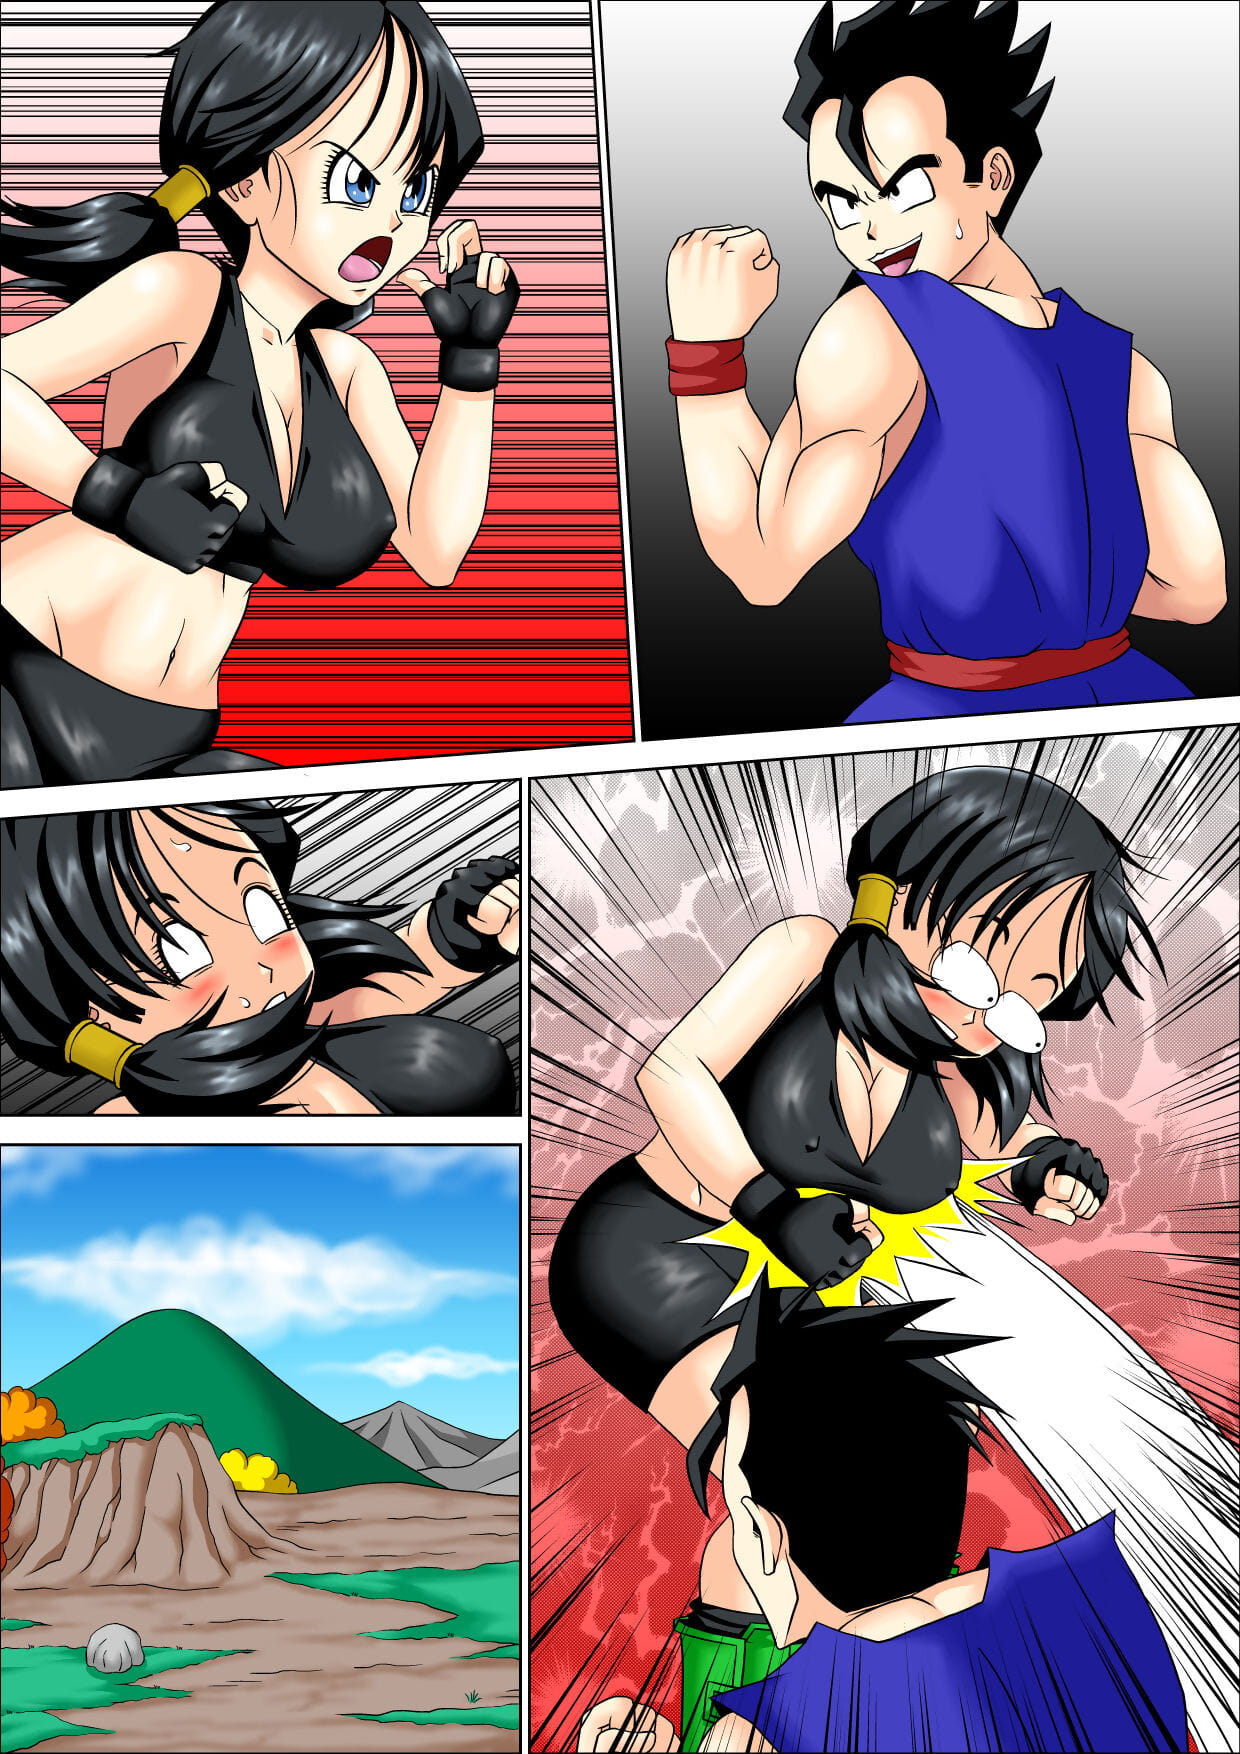 sparring baise PARTIE 2 page 1